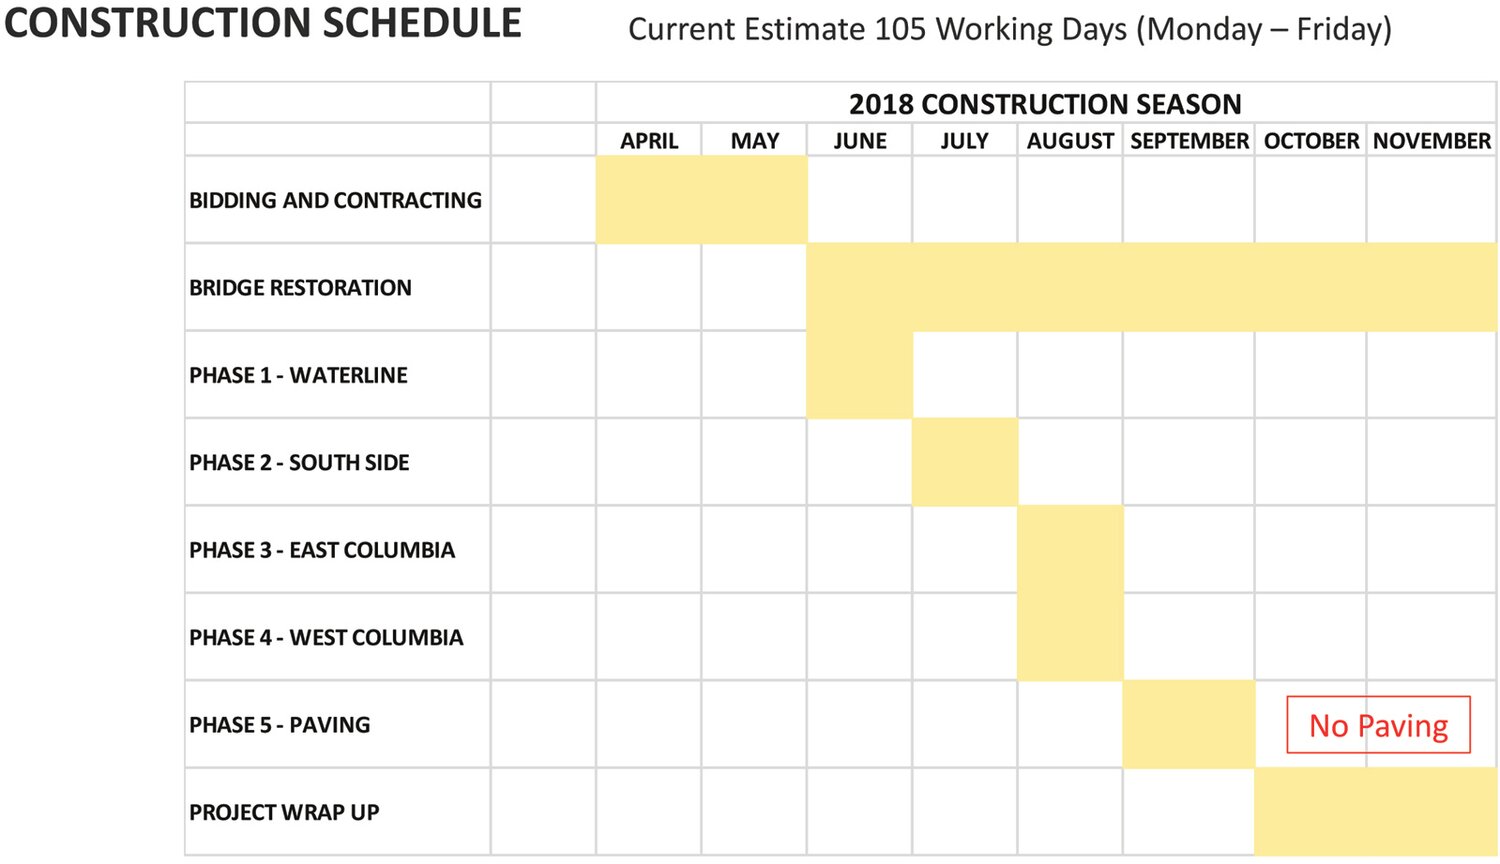 Anticipated construction schedule during projects.